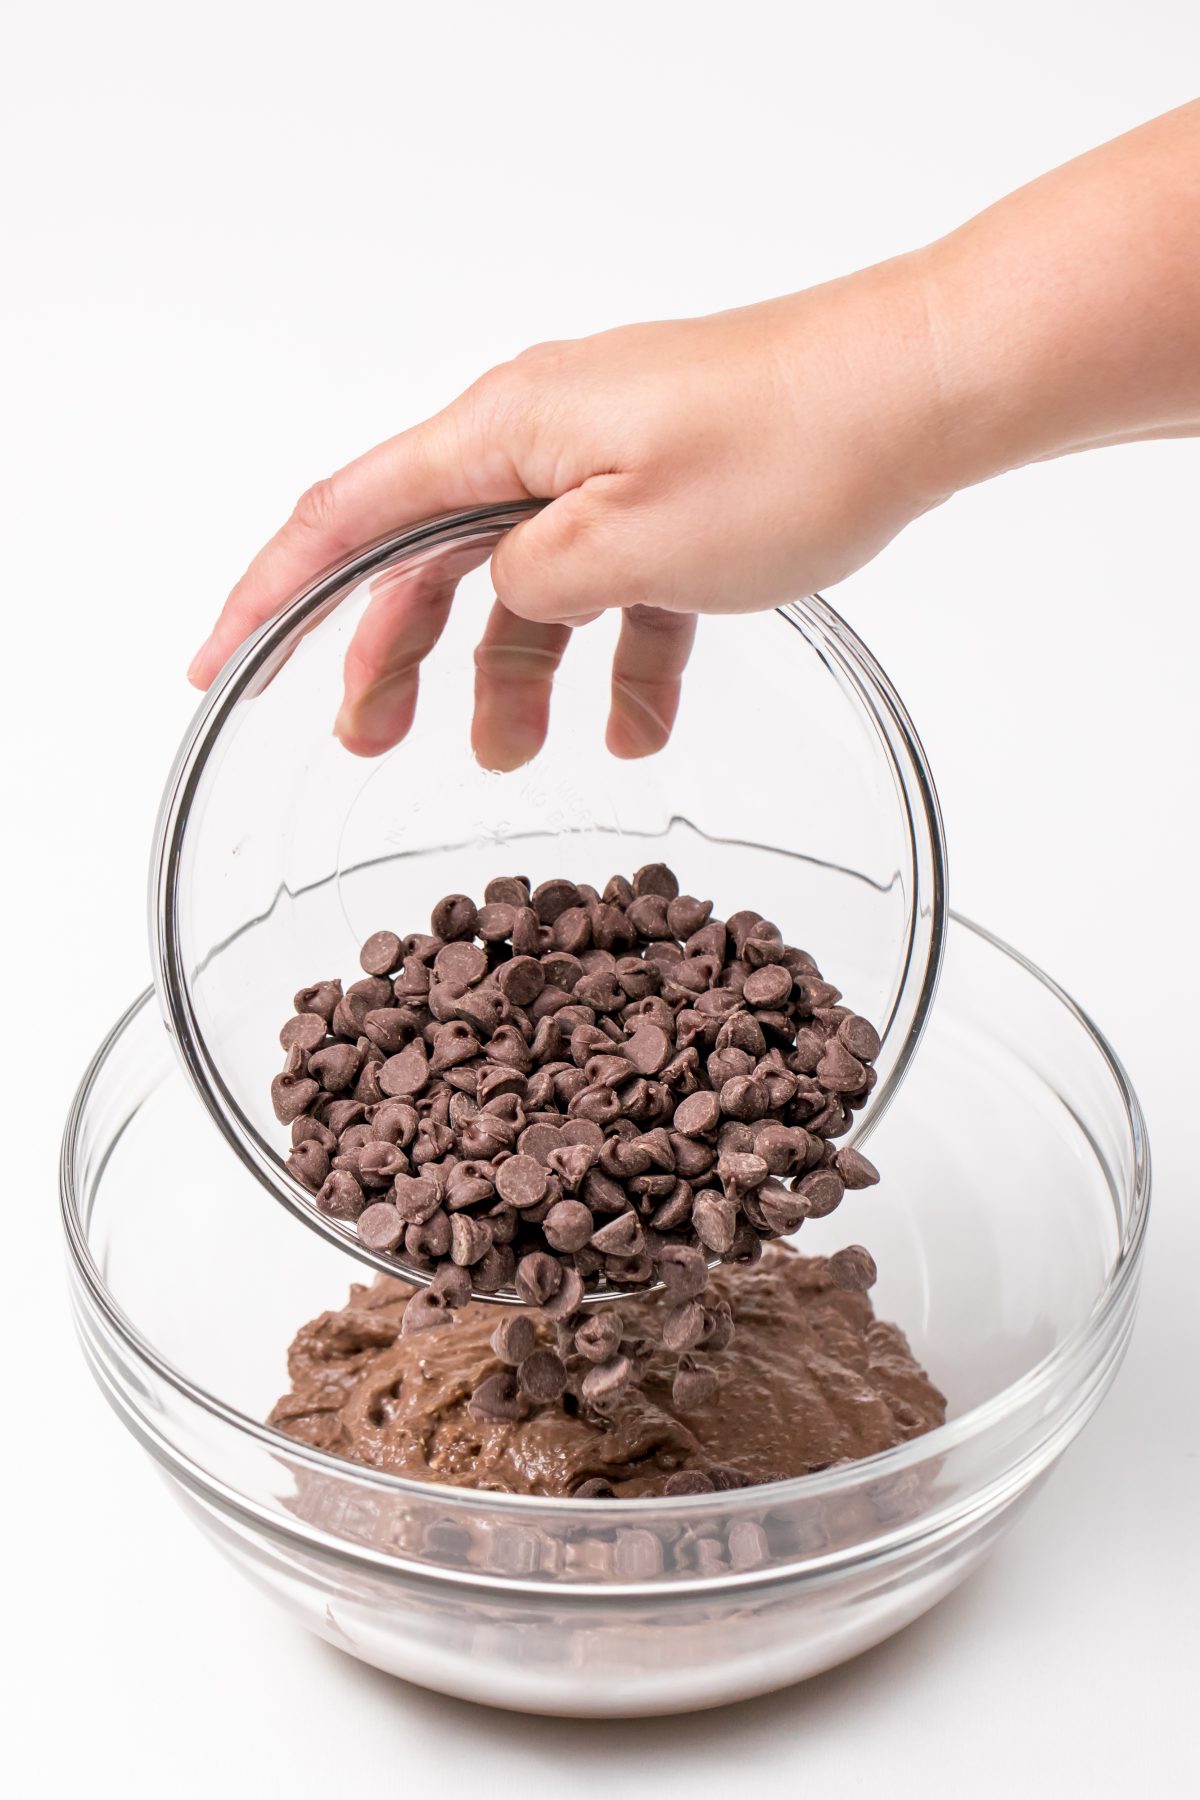 Add chocolate chips to bowl